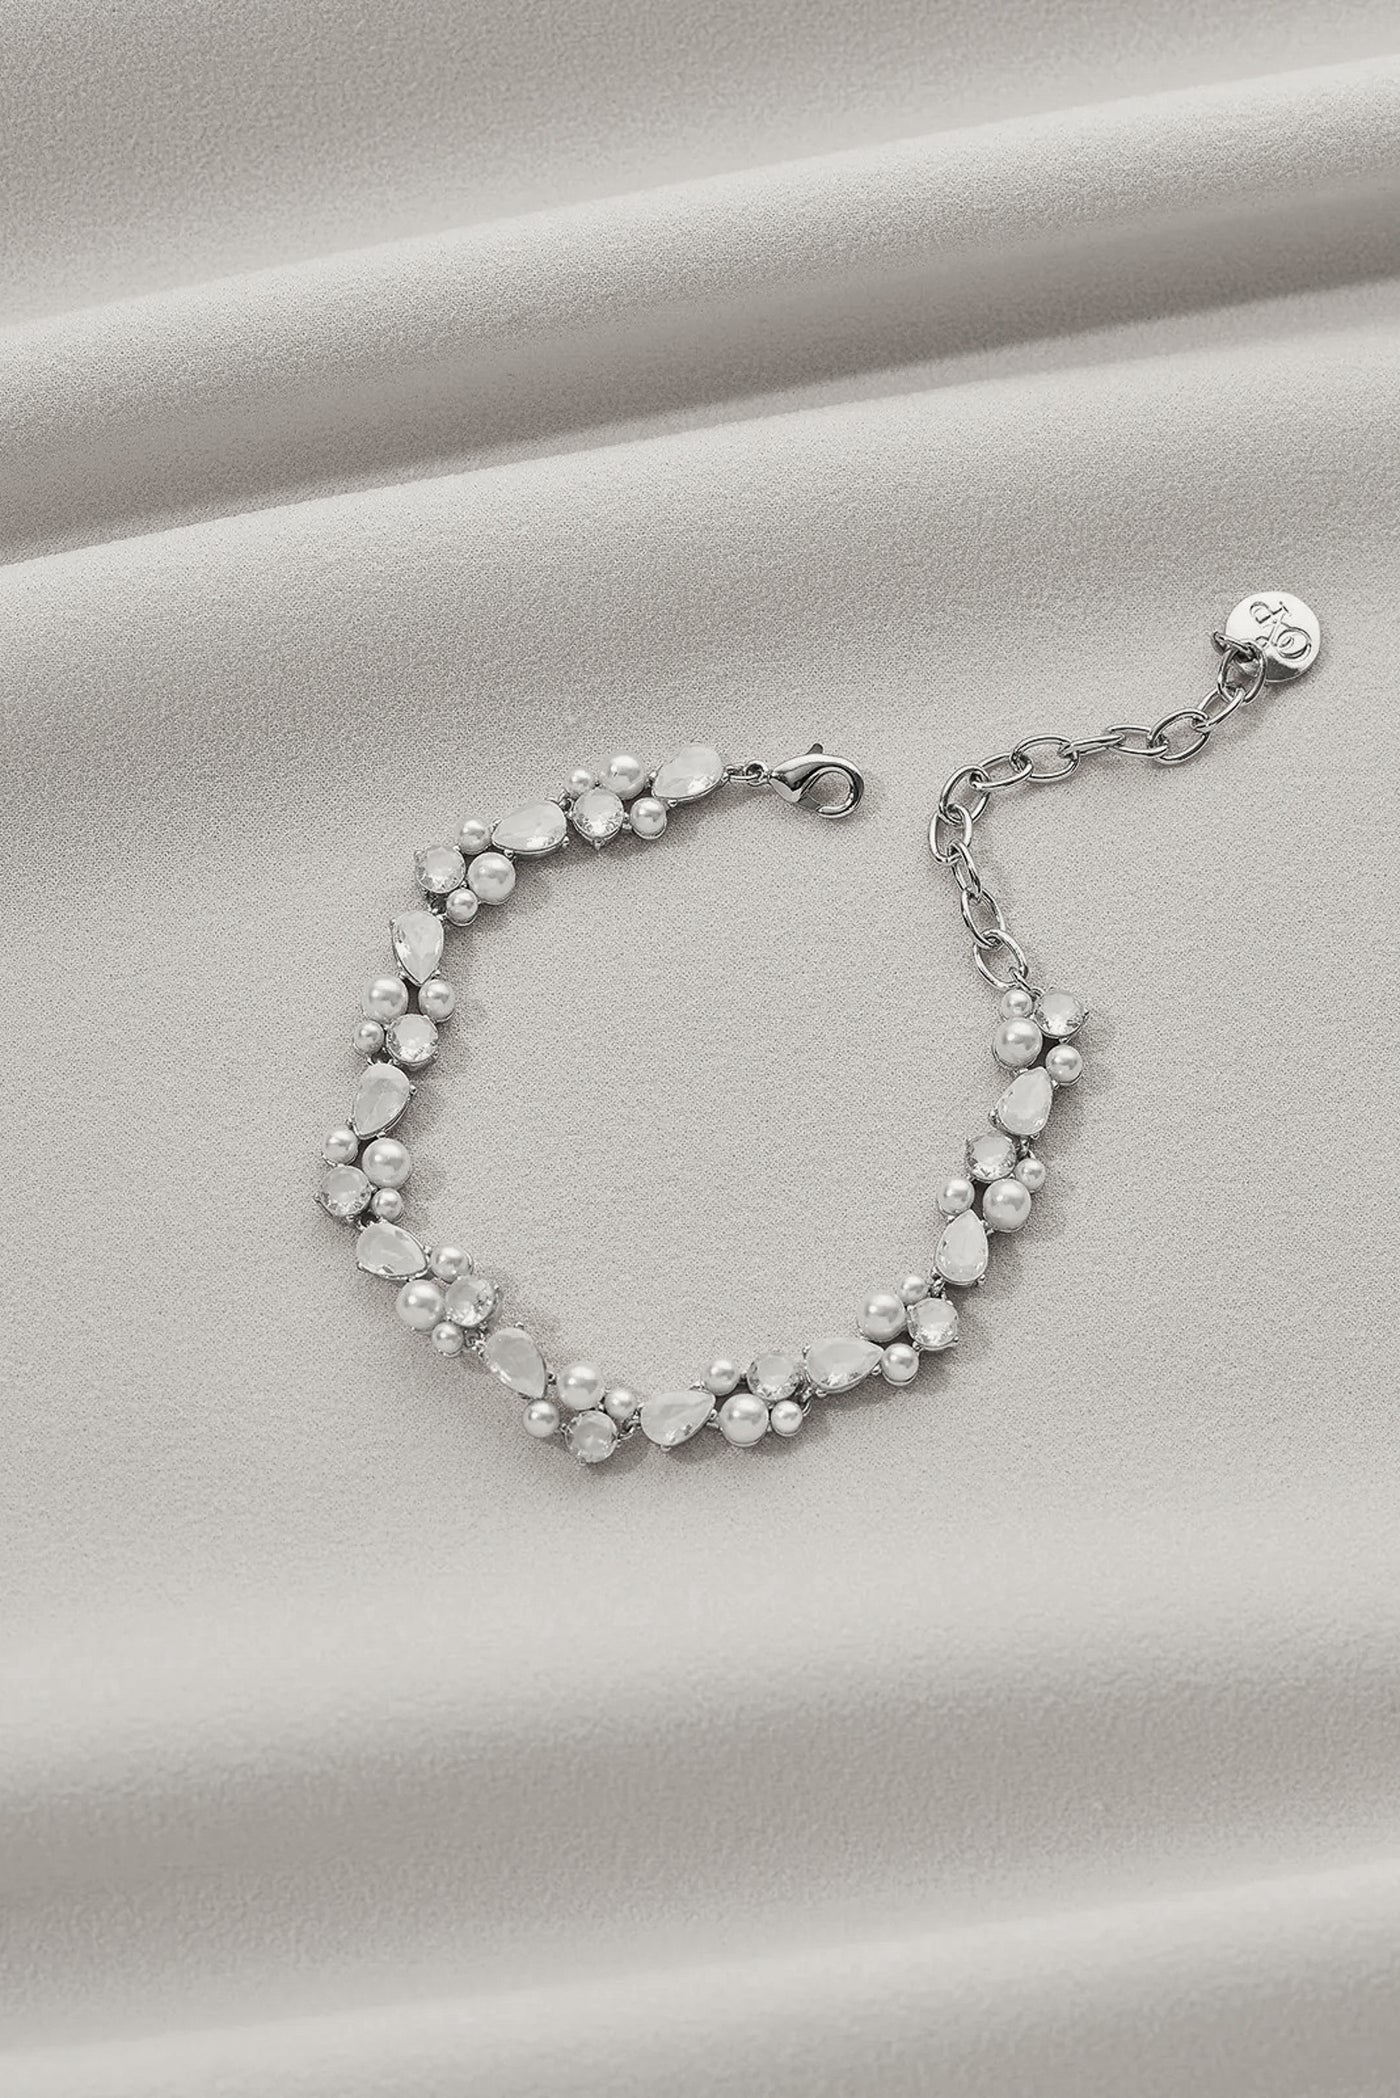 A silver bracelet with teardrop gems and little pearl details.